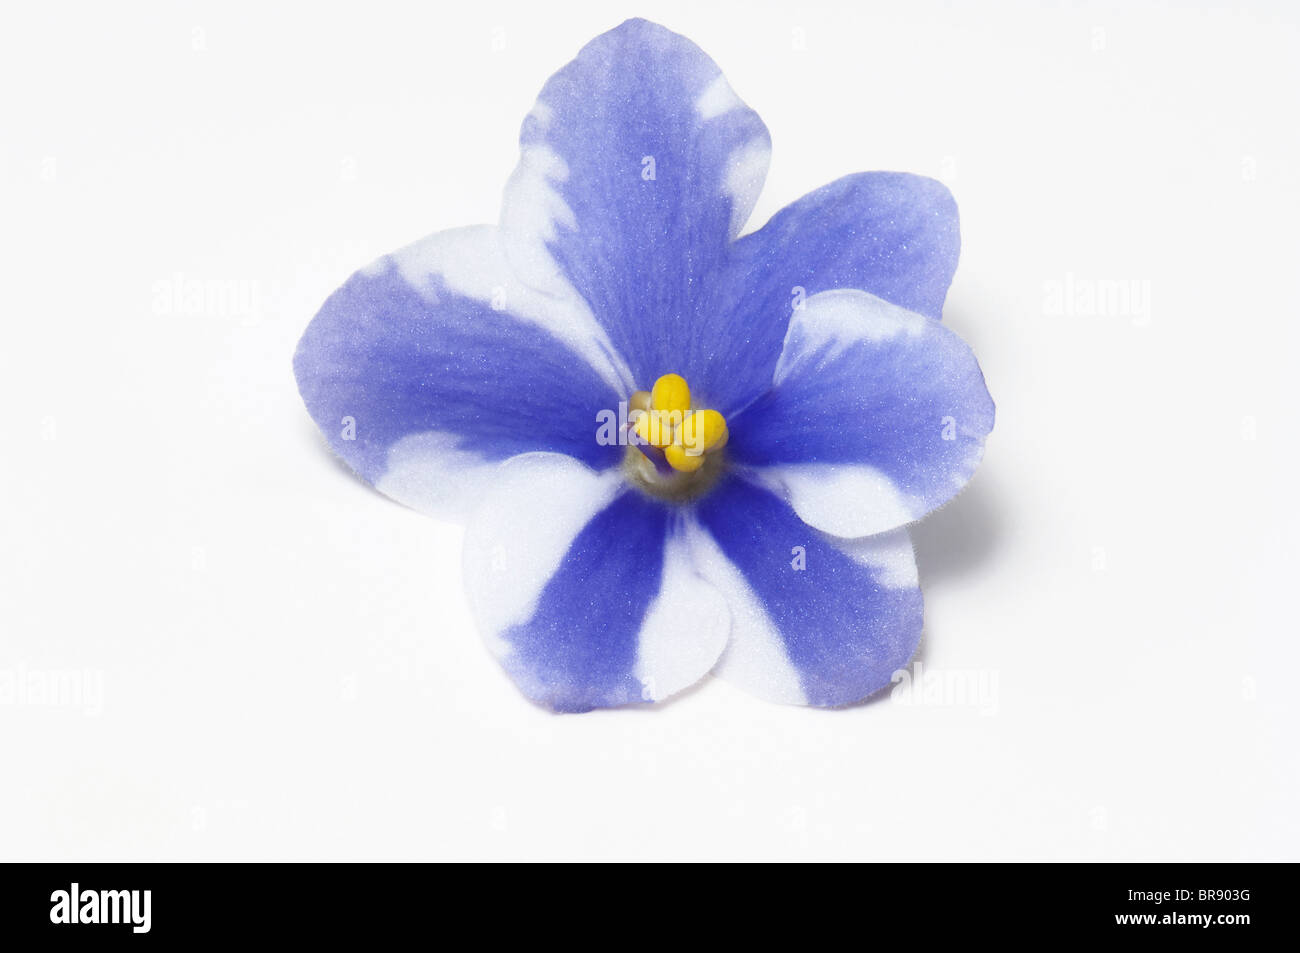 Saintpaulia, African Violet (Saintpaulia ionantha-Hybrid), white and blue flower, studio picture against a white background. Stock Photo